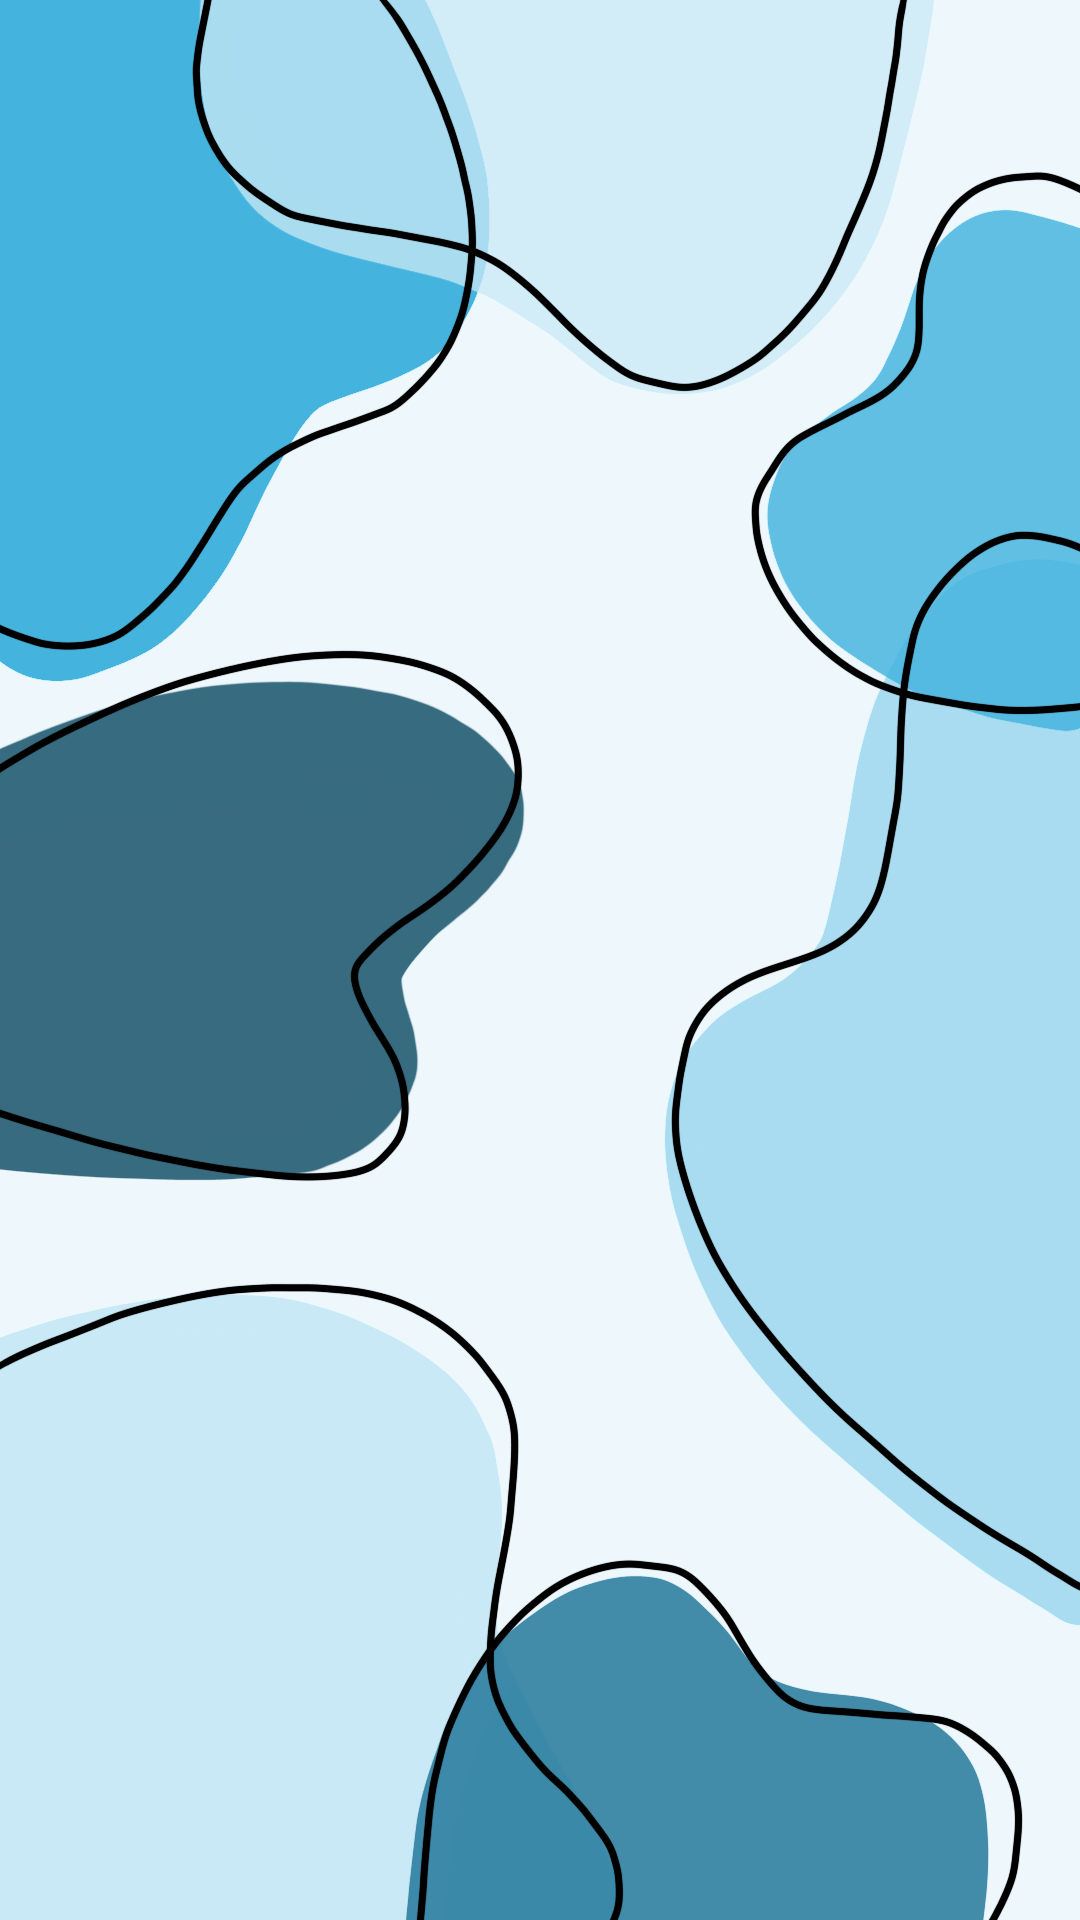 A blue and white drawing of shapes - Blue, aqua, teal, cow